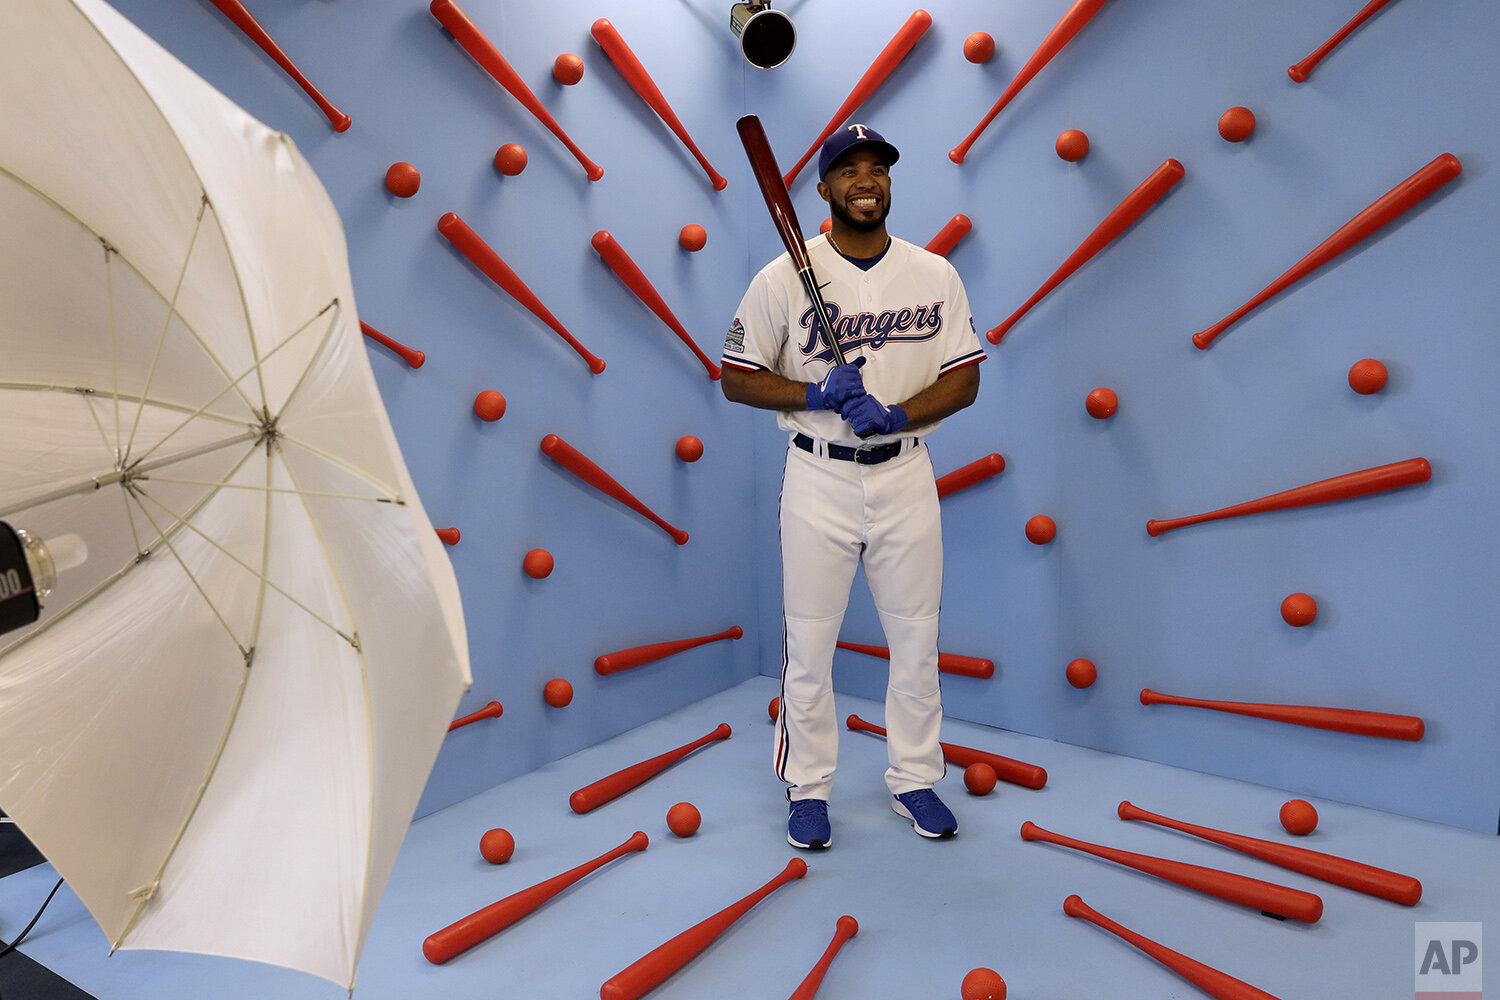  Texas Rangers’ Elvis Andrus poses for a photographer during the team’s photo day at spring training baseball practice Wednesday, Feb. 19, 2020, in Surprise, Ariz. (AP Photo/Charlie Riedel) 